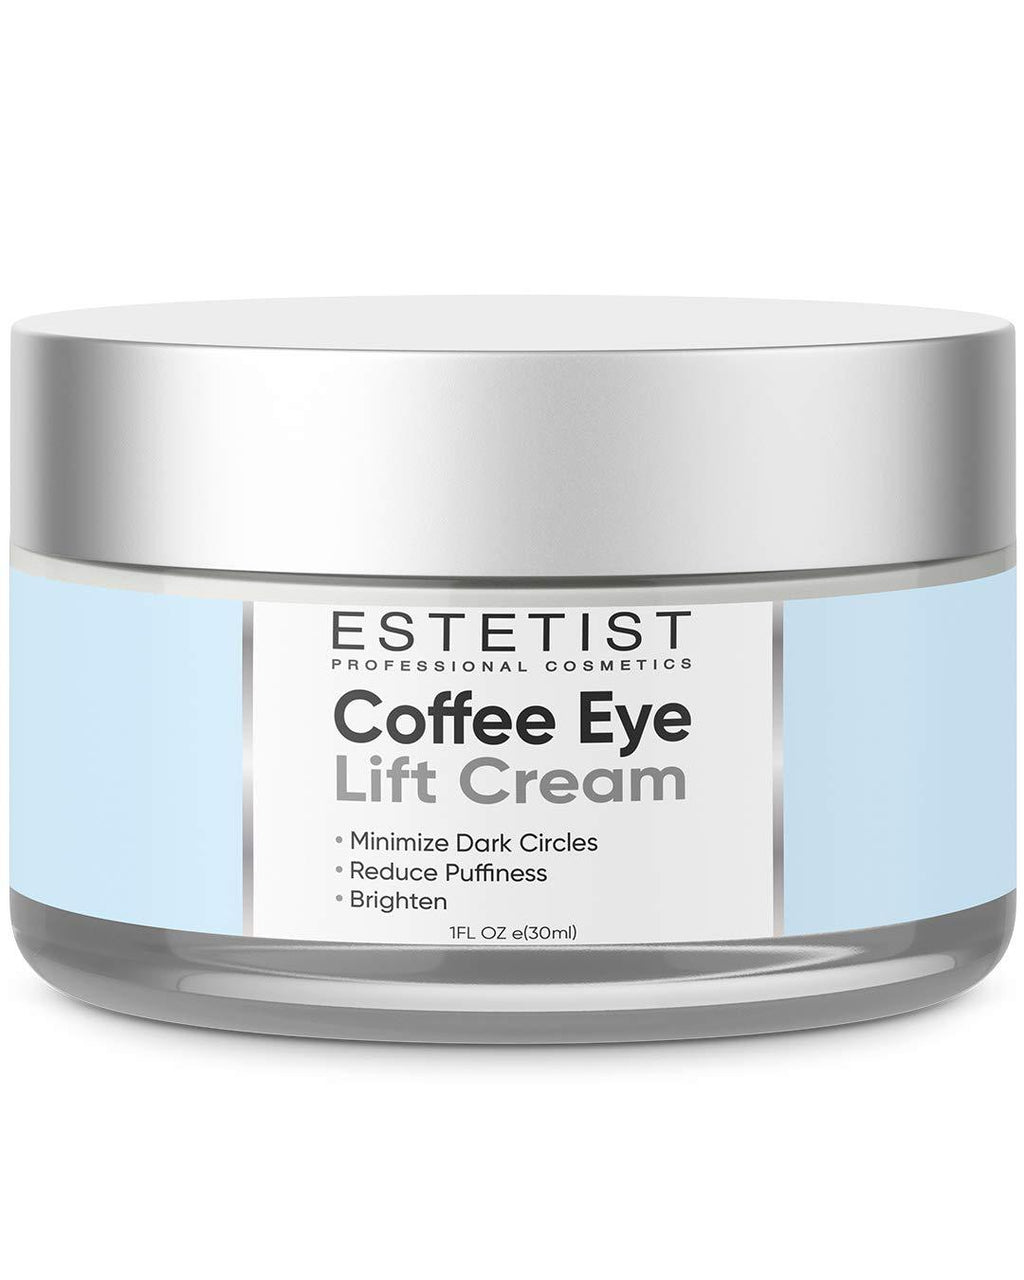 Caffeine Infused Coffee Eye Lift Cream - Reduces Puffiness, Brightens Dark Circles, & Firms Under Eye Bags - Anti Aging, Wrinkle Fighting Skin Treatment eyes - BeesActive Australia